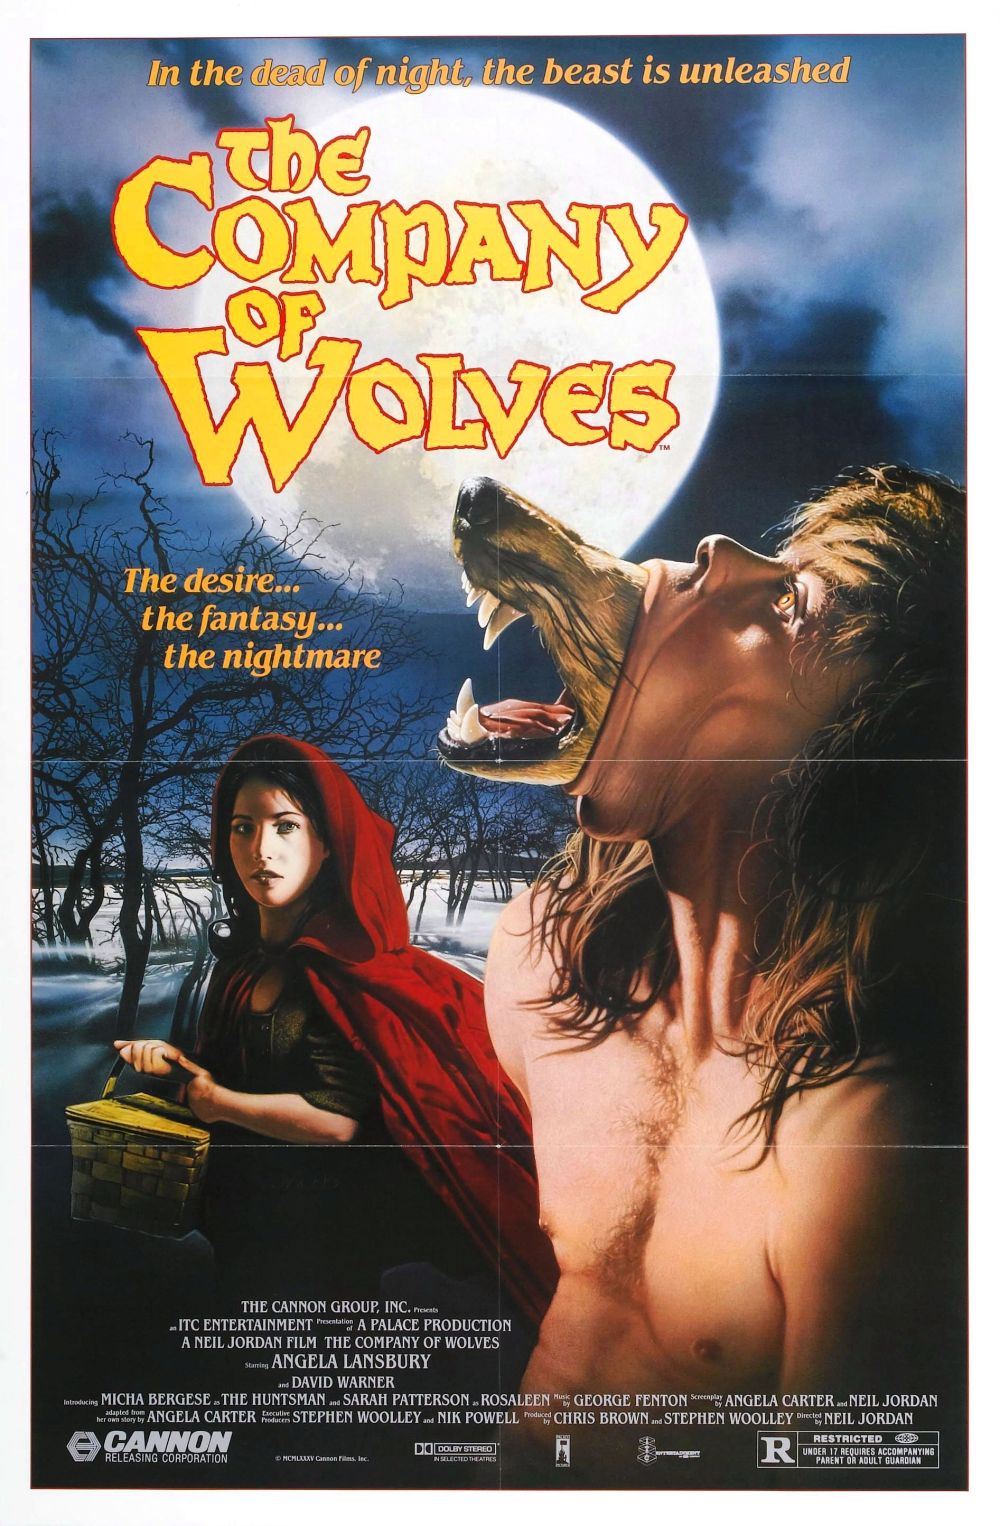 company_of_wolves_poster_01